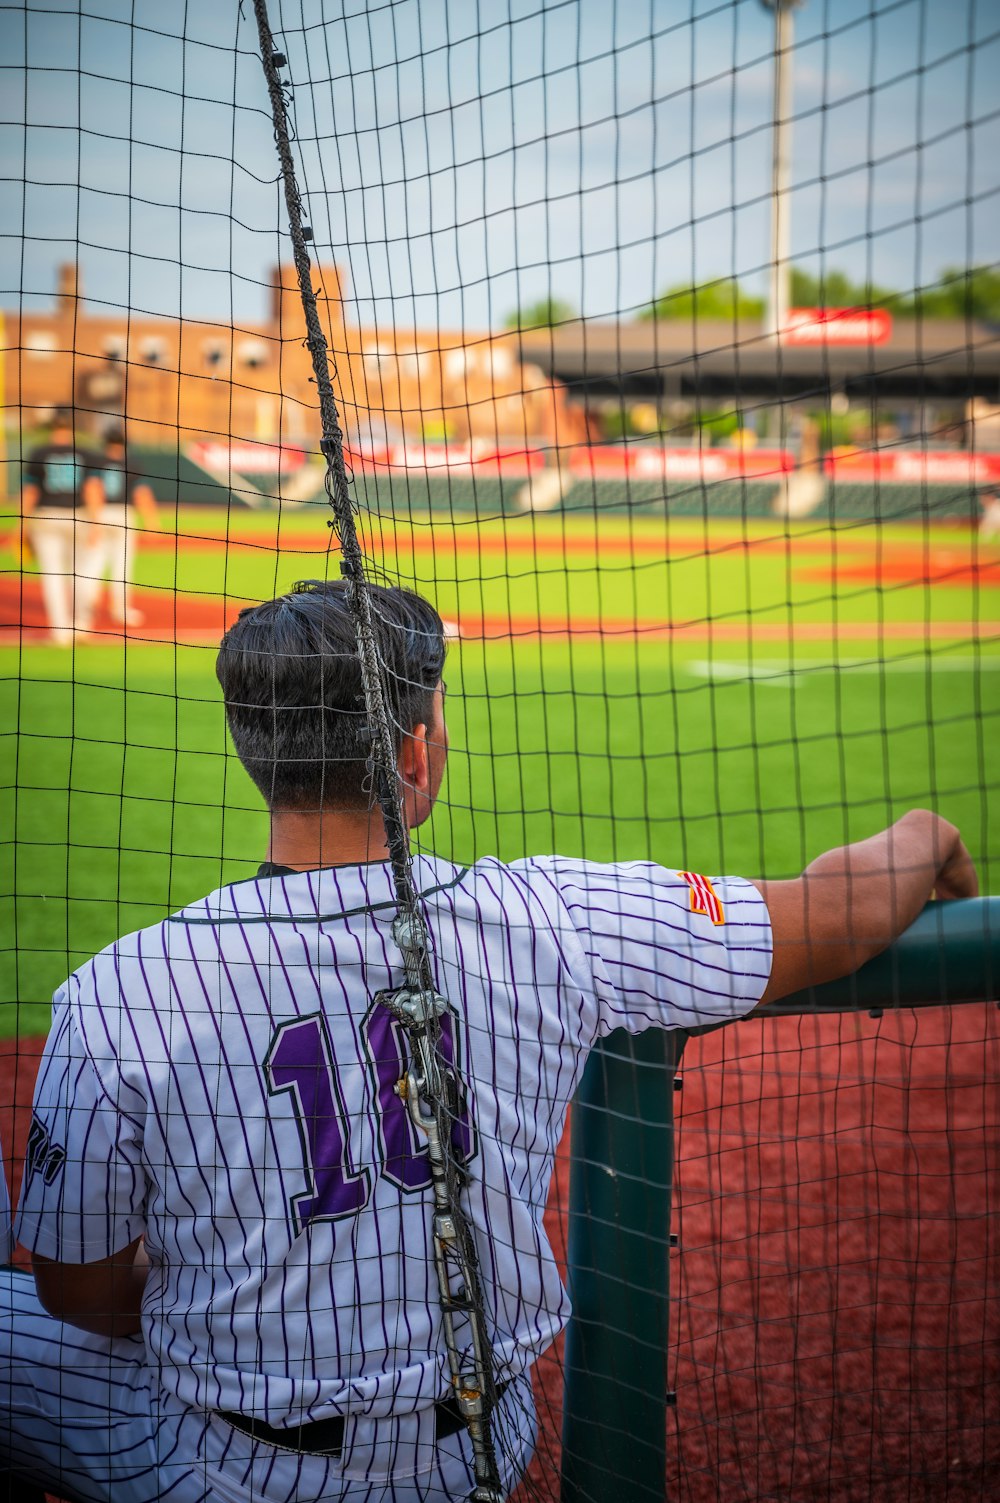 a baseball player sitting in the dugout at a baseball game